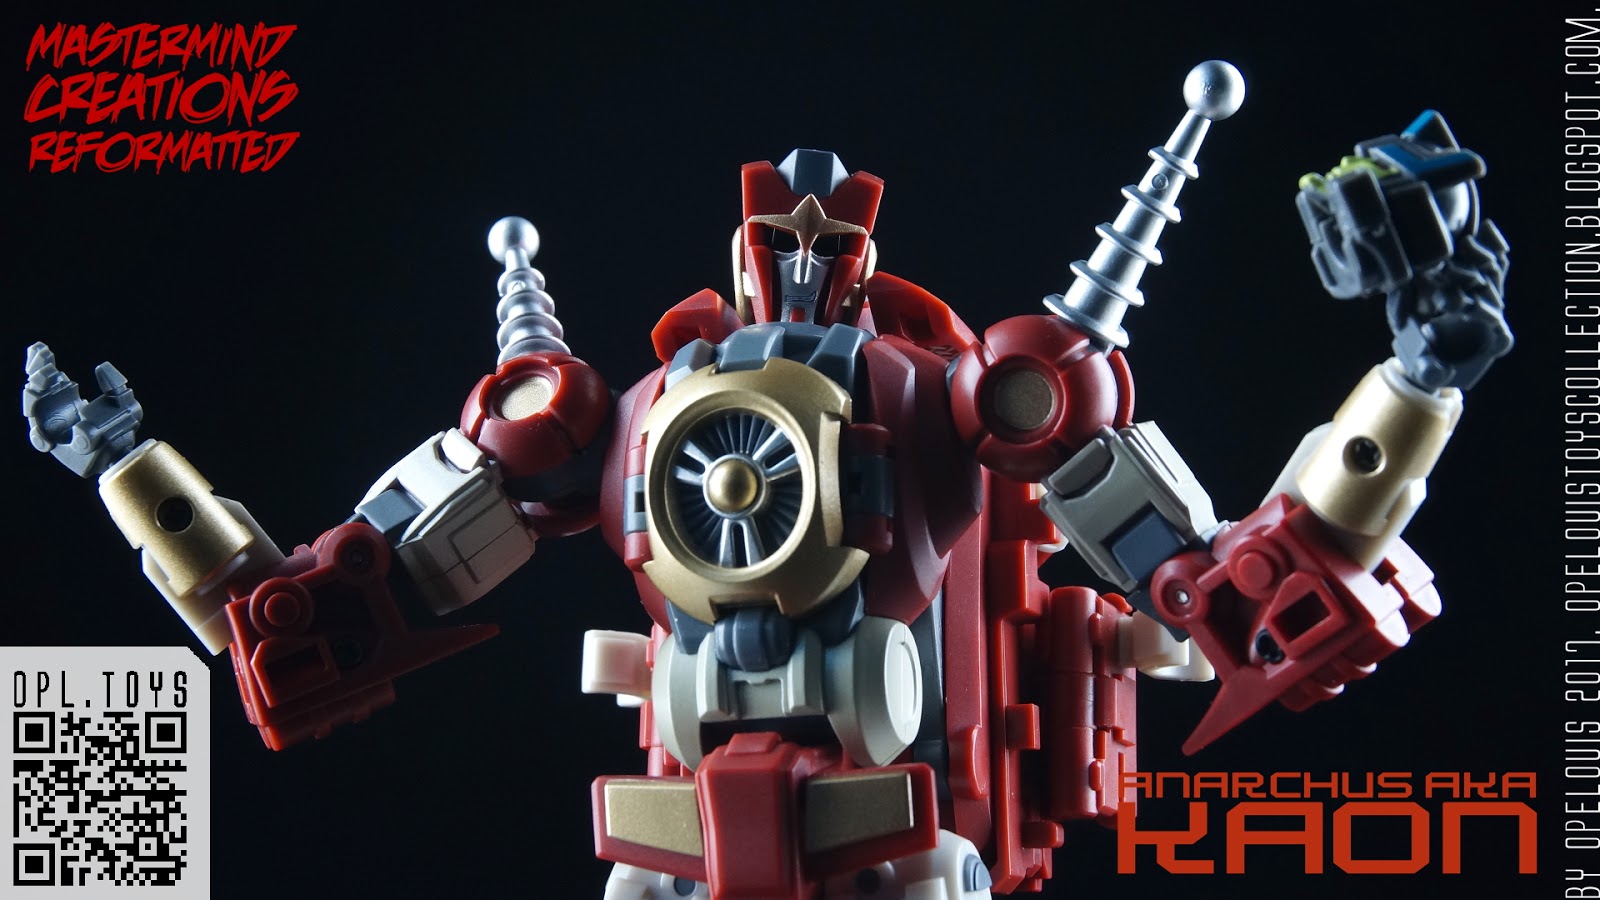 Opelouis S Toys Collection Mastermind Creations Reformatted R 16 Anarchus Aka D J D Kaon